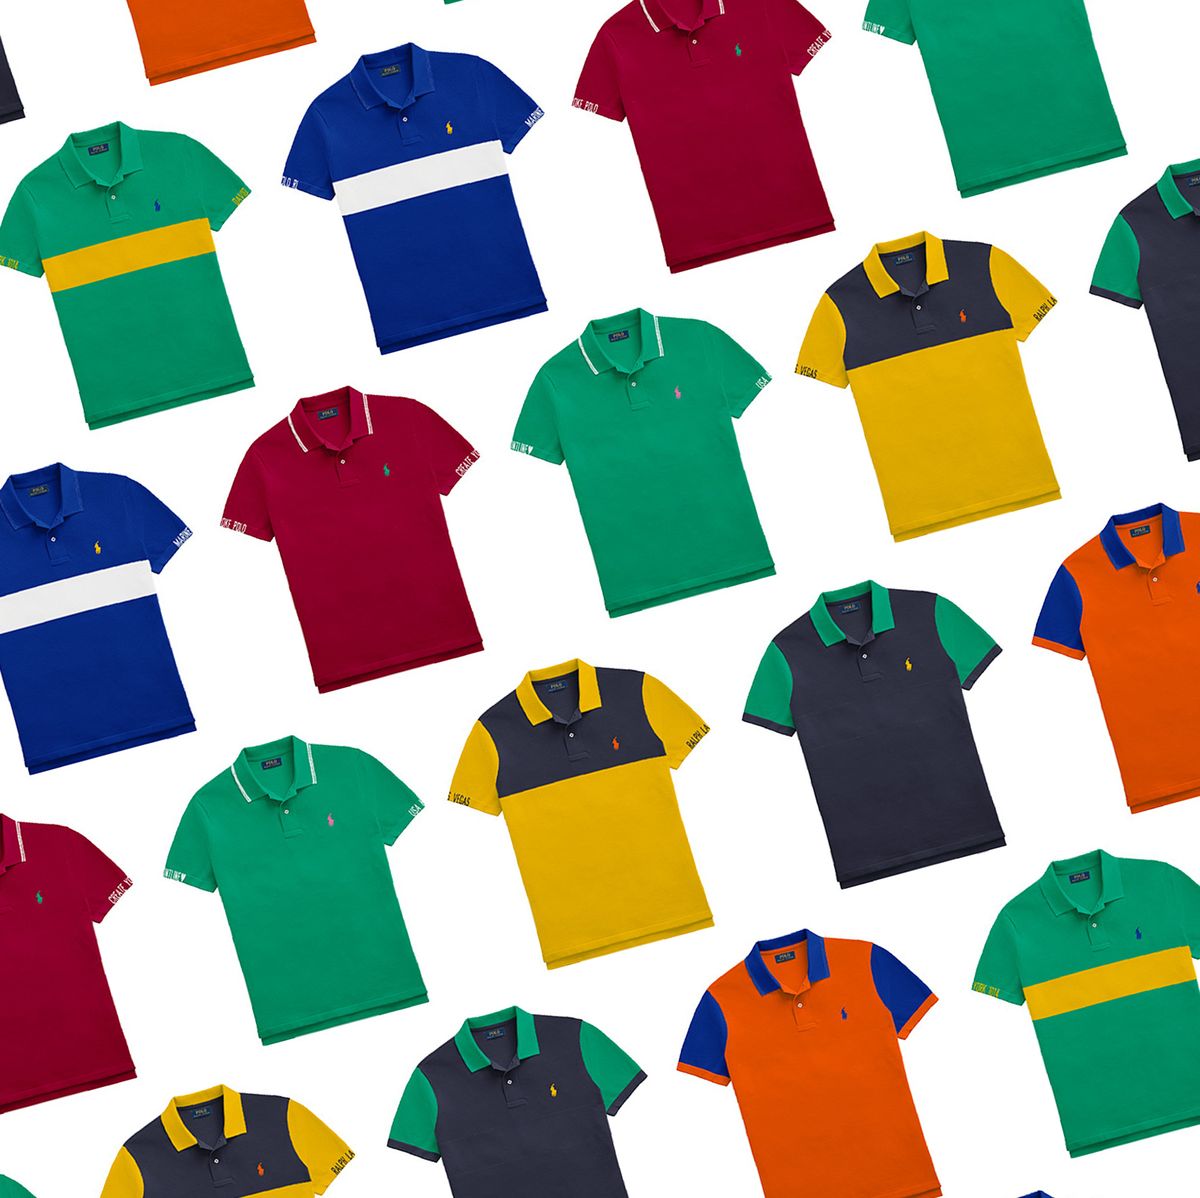 Ralph Lauren Introduces Made-to-Order Polo Shirts